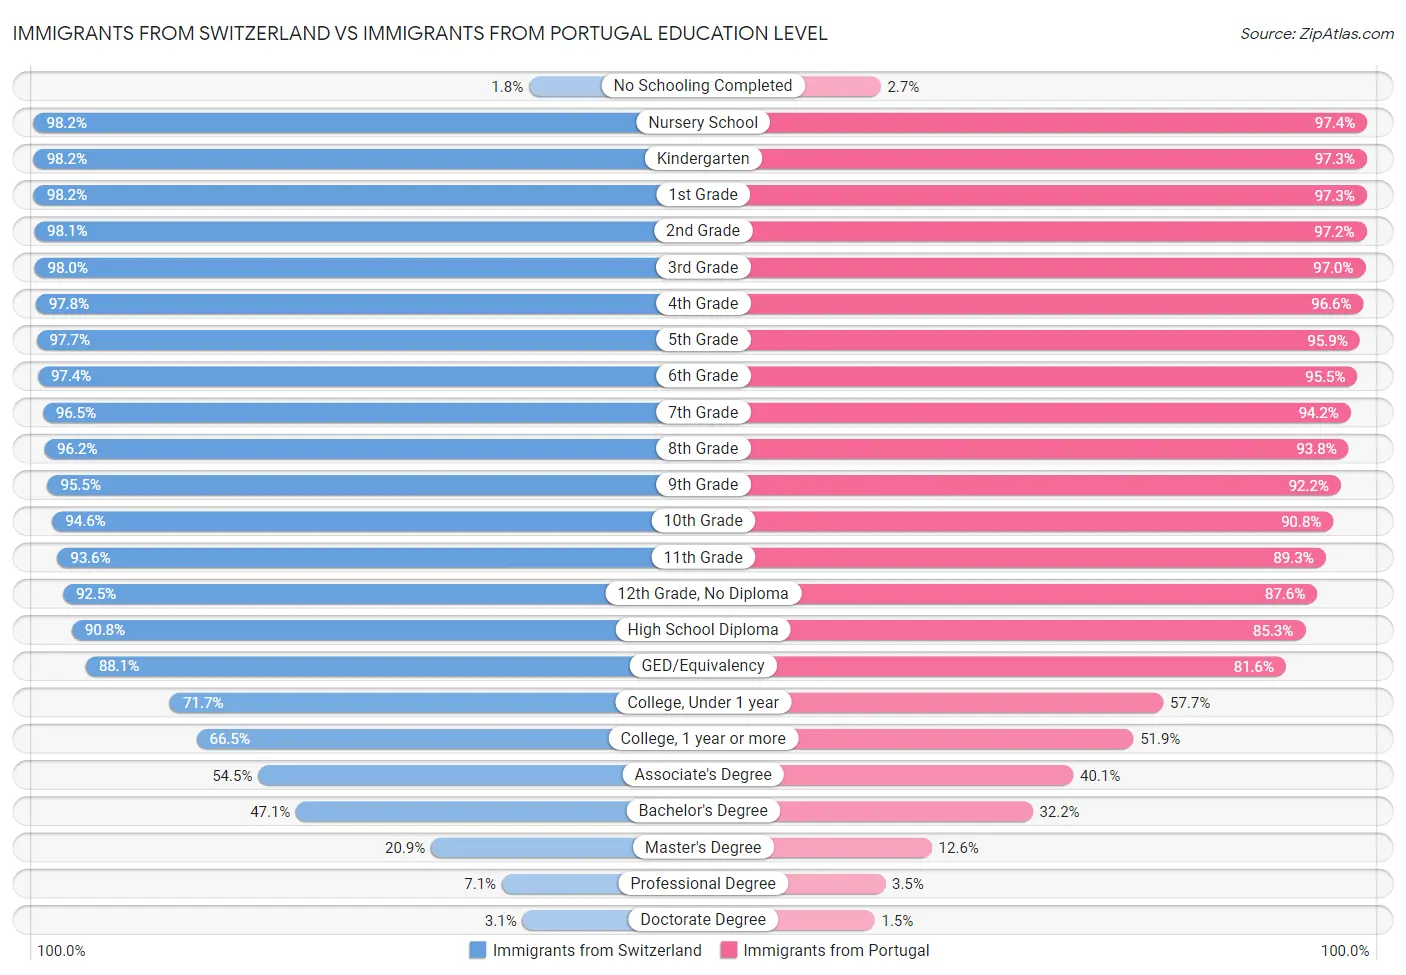 Immigrants from Switzerland vs Immigrants from Portugal Education Level